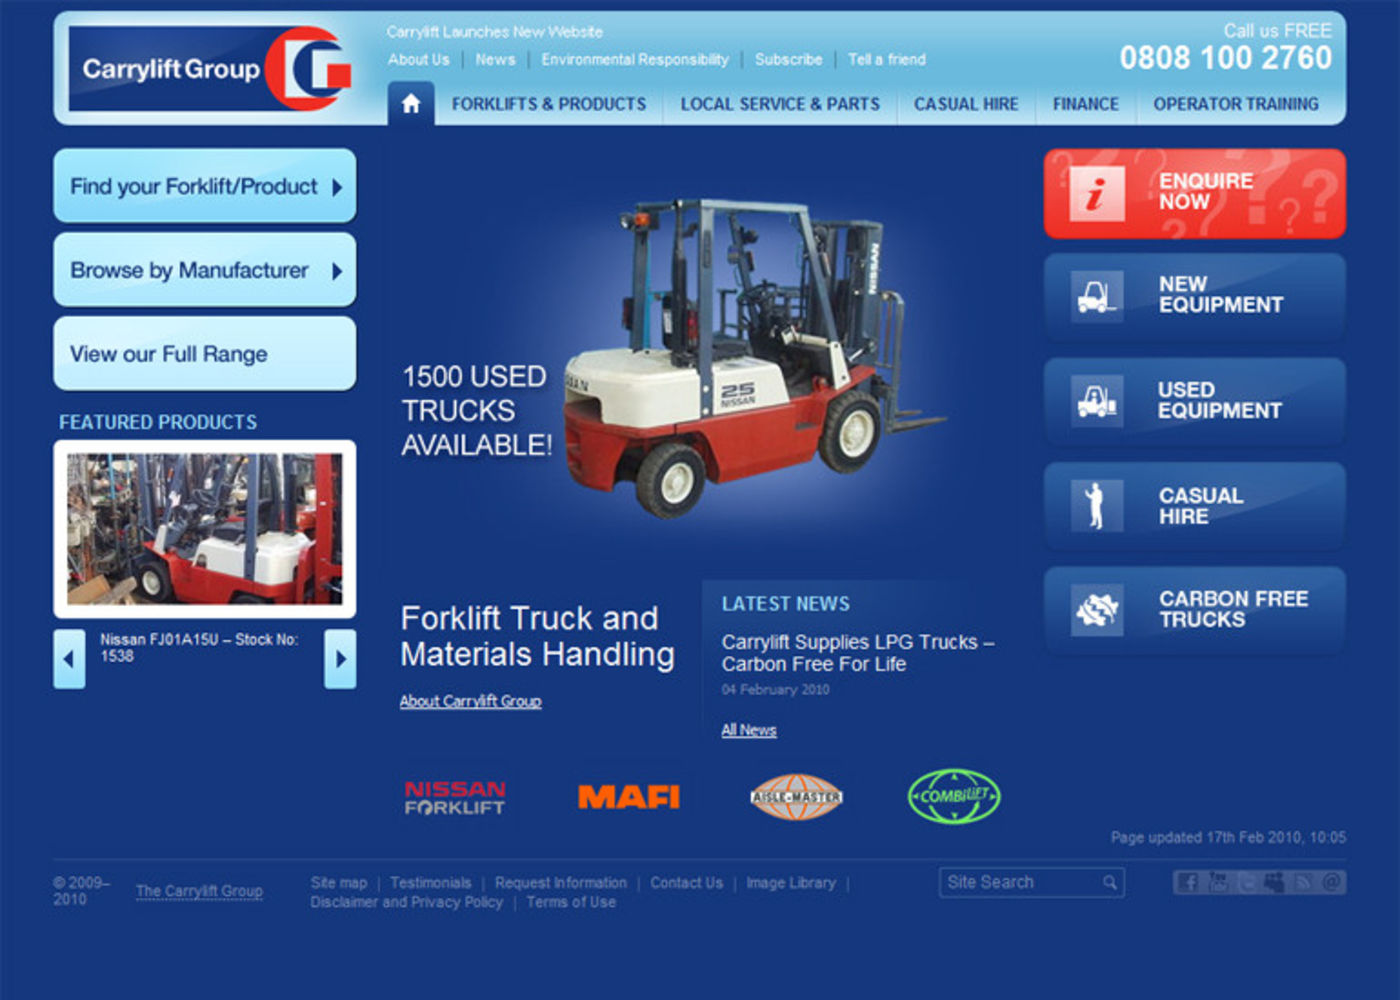 The Carrylift Group (2006) Homepage header